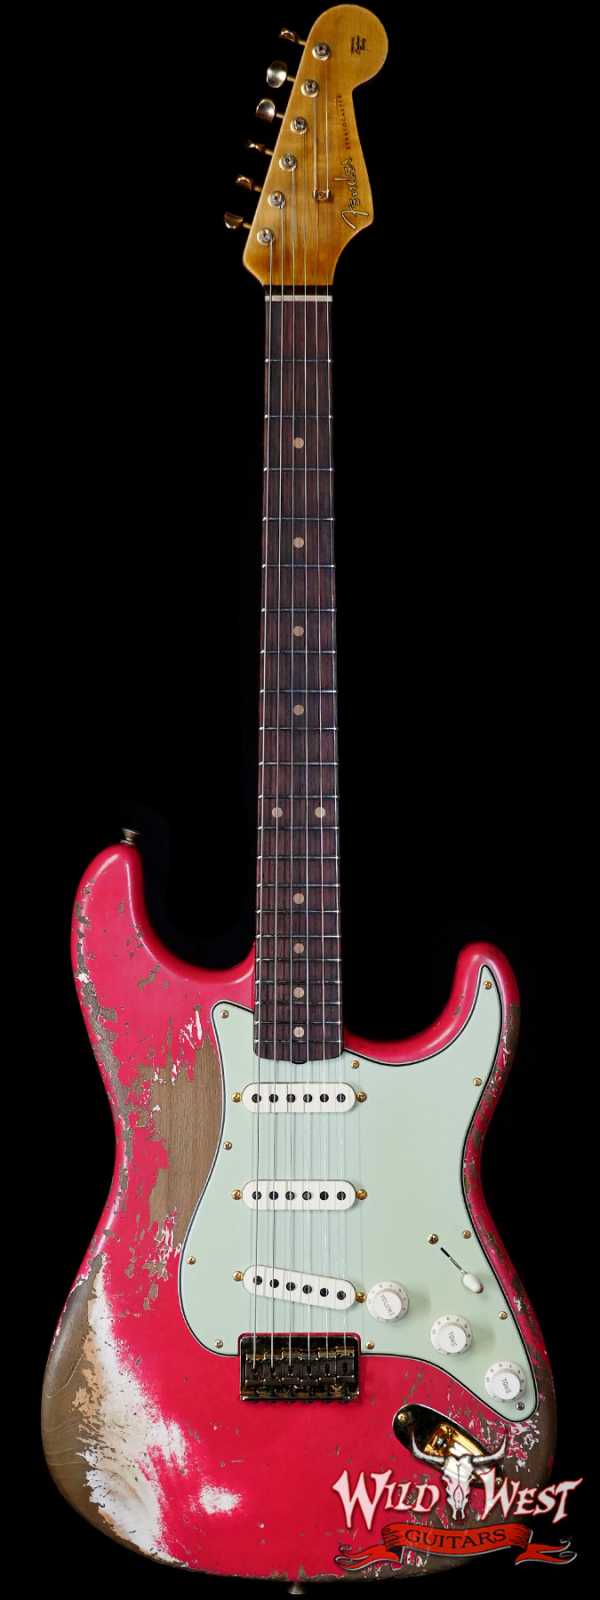 Fender Custom Shop Wild West Guitars 25th Anniversary 1960 Stratocaster Hardtail Madagascar Rosewood Fretboard Heavy Relic Fiesta Red 7.20